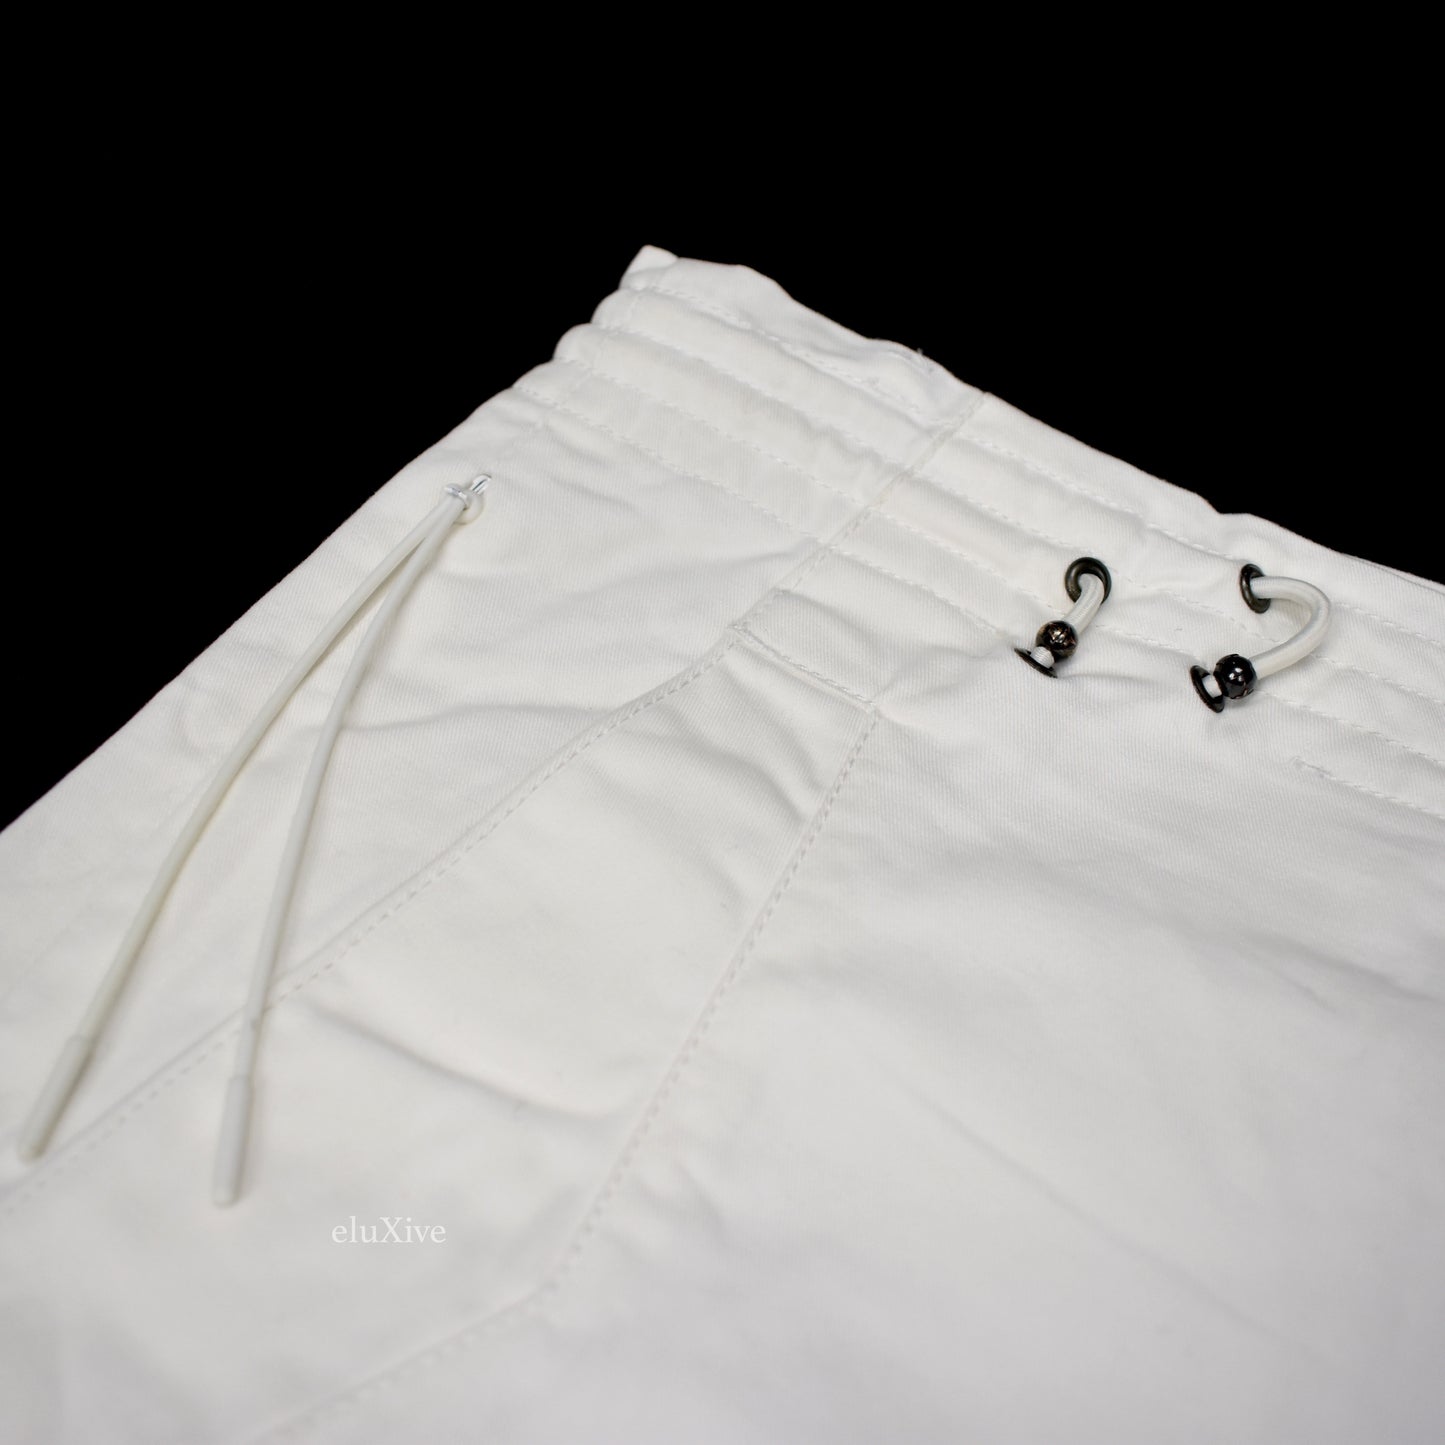 Maharishi - White 'Year of the Rooster' Pants